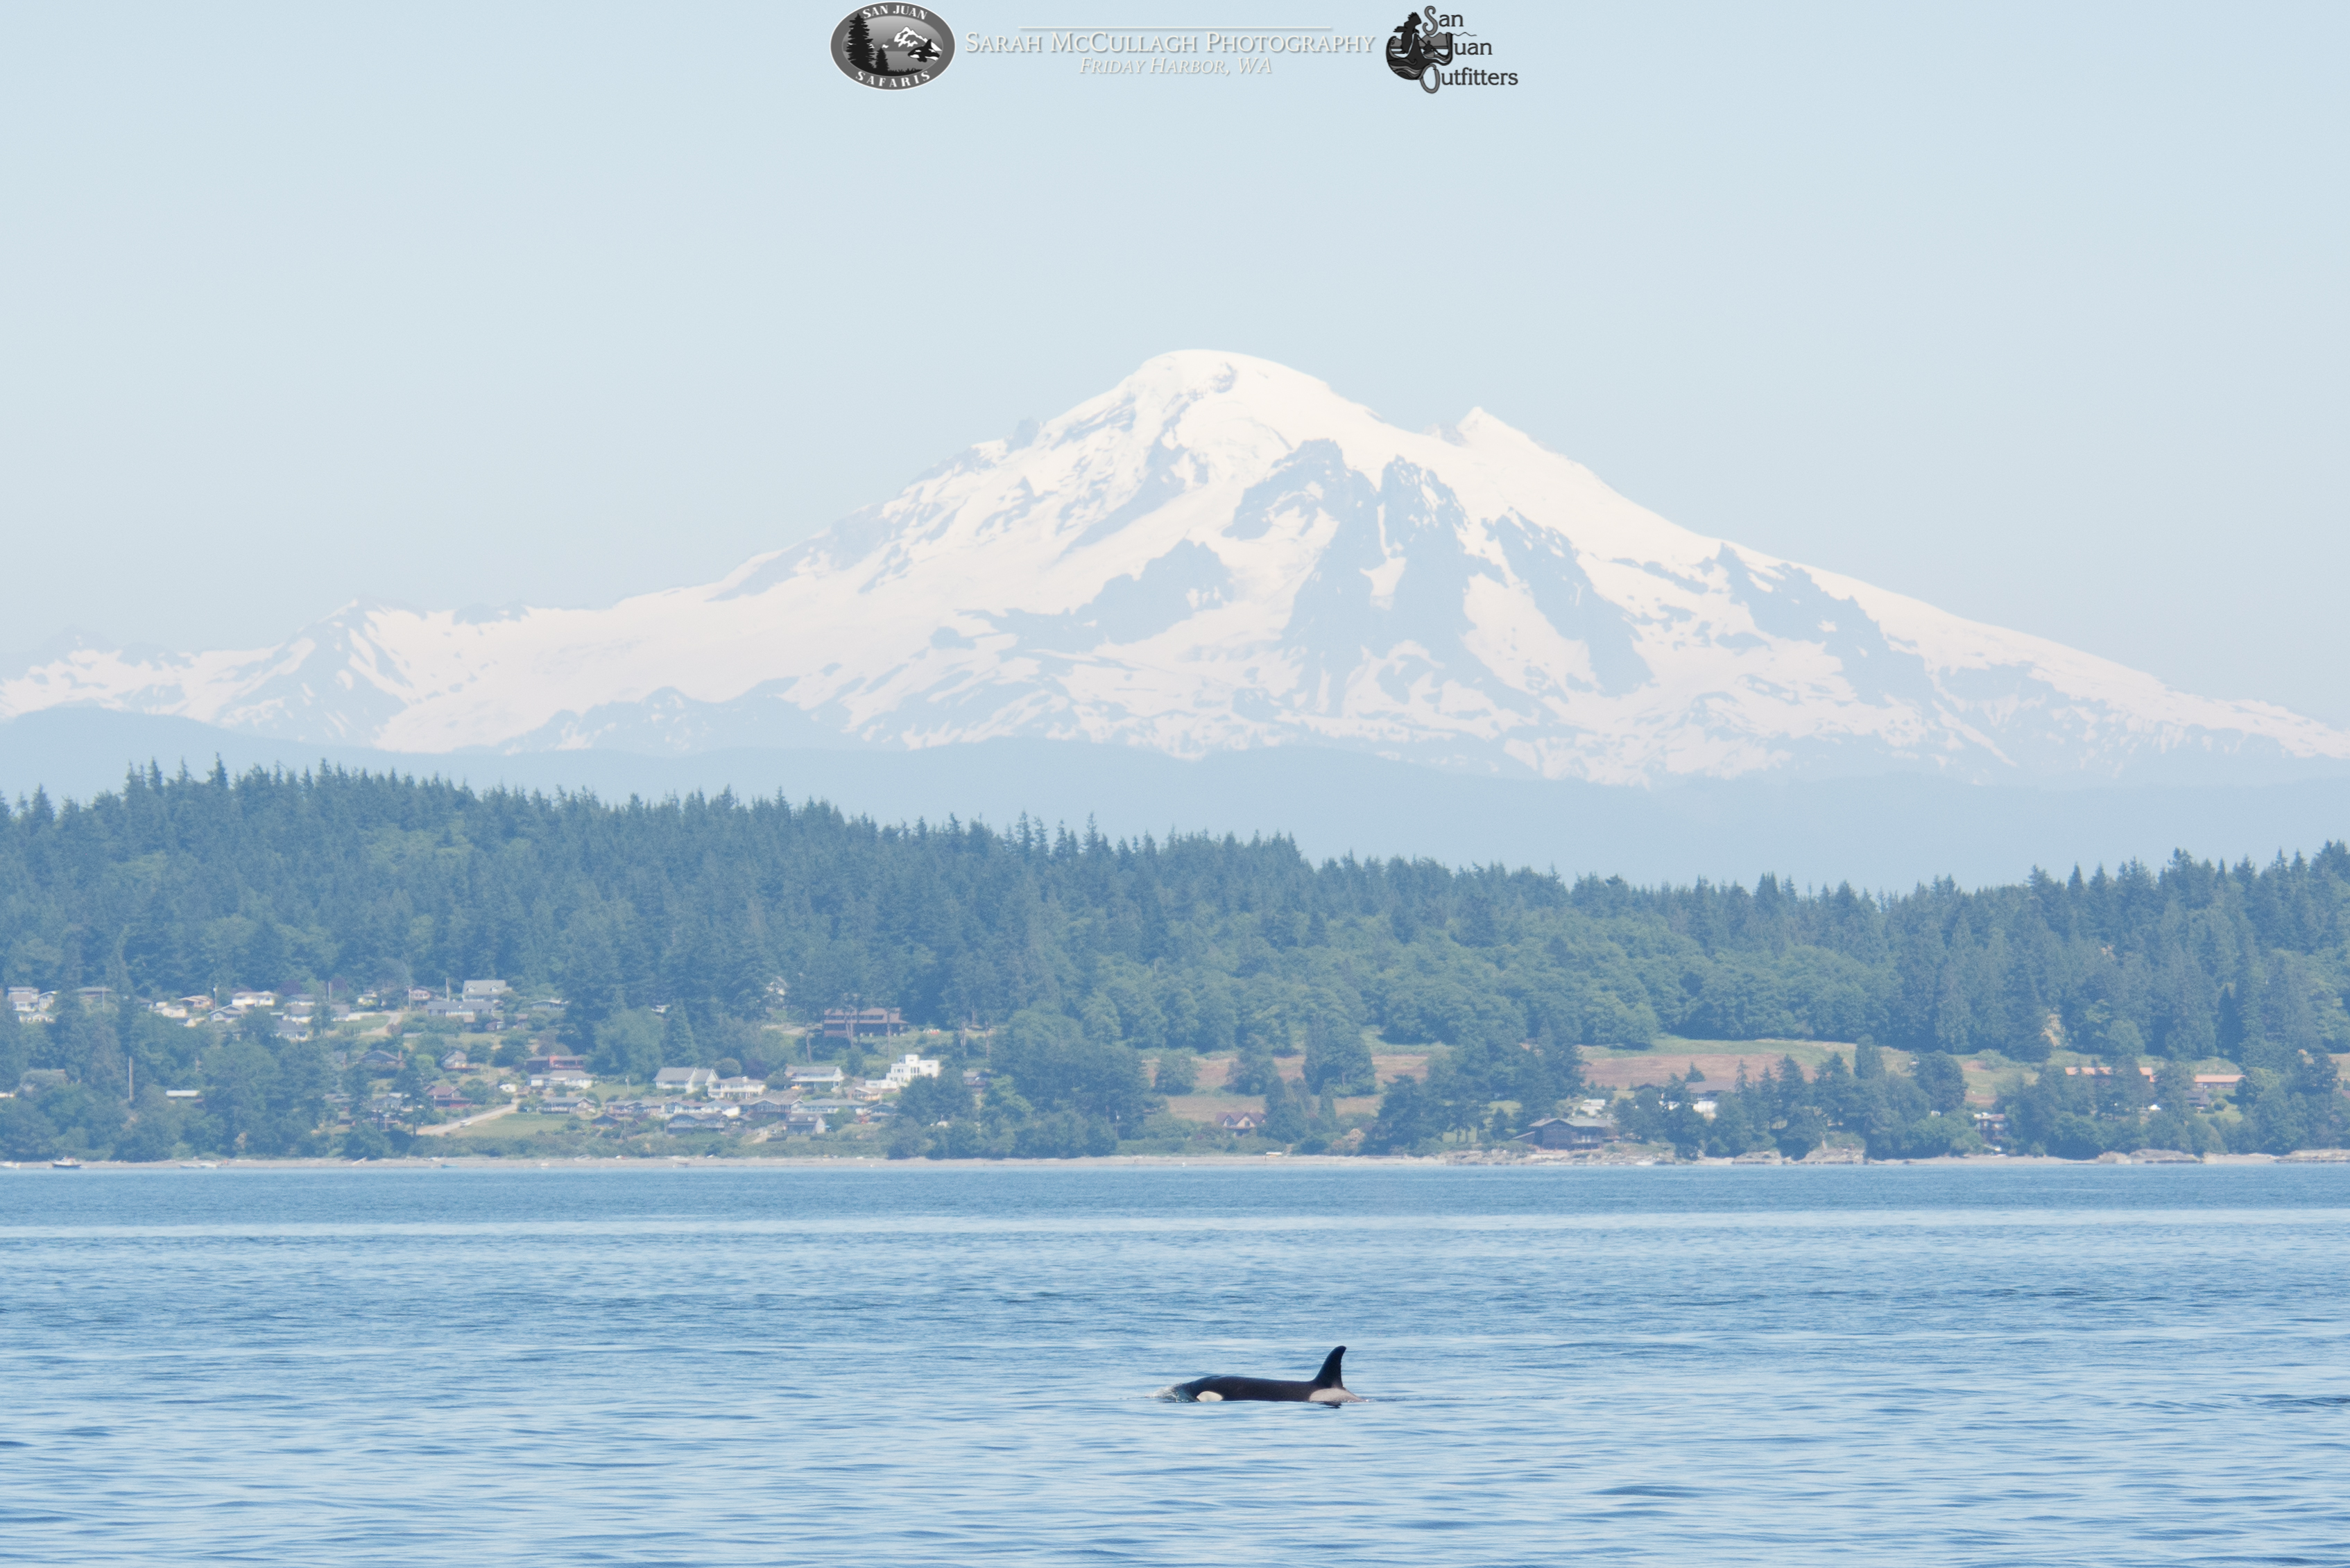 Mt. Baker and an Orca